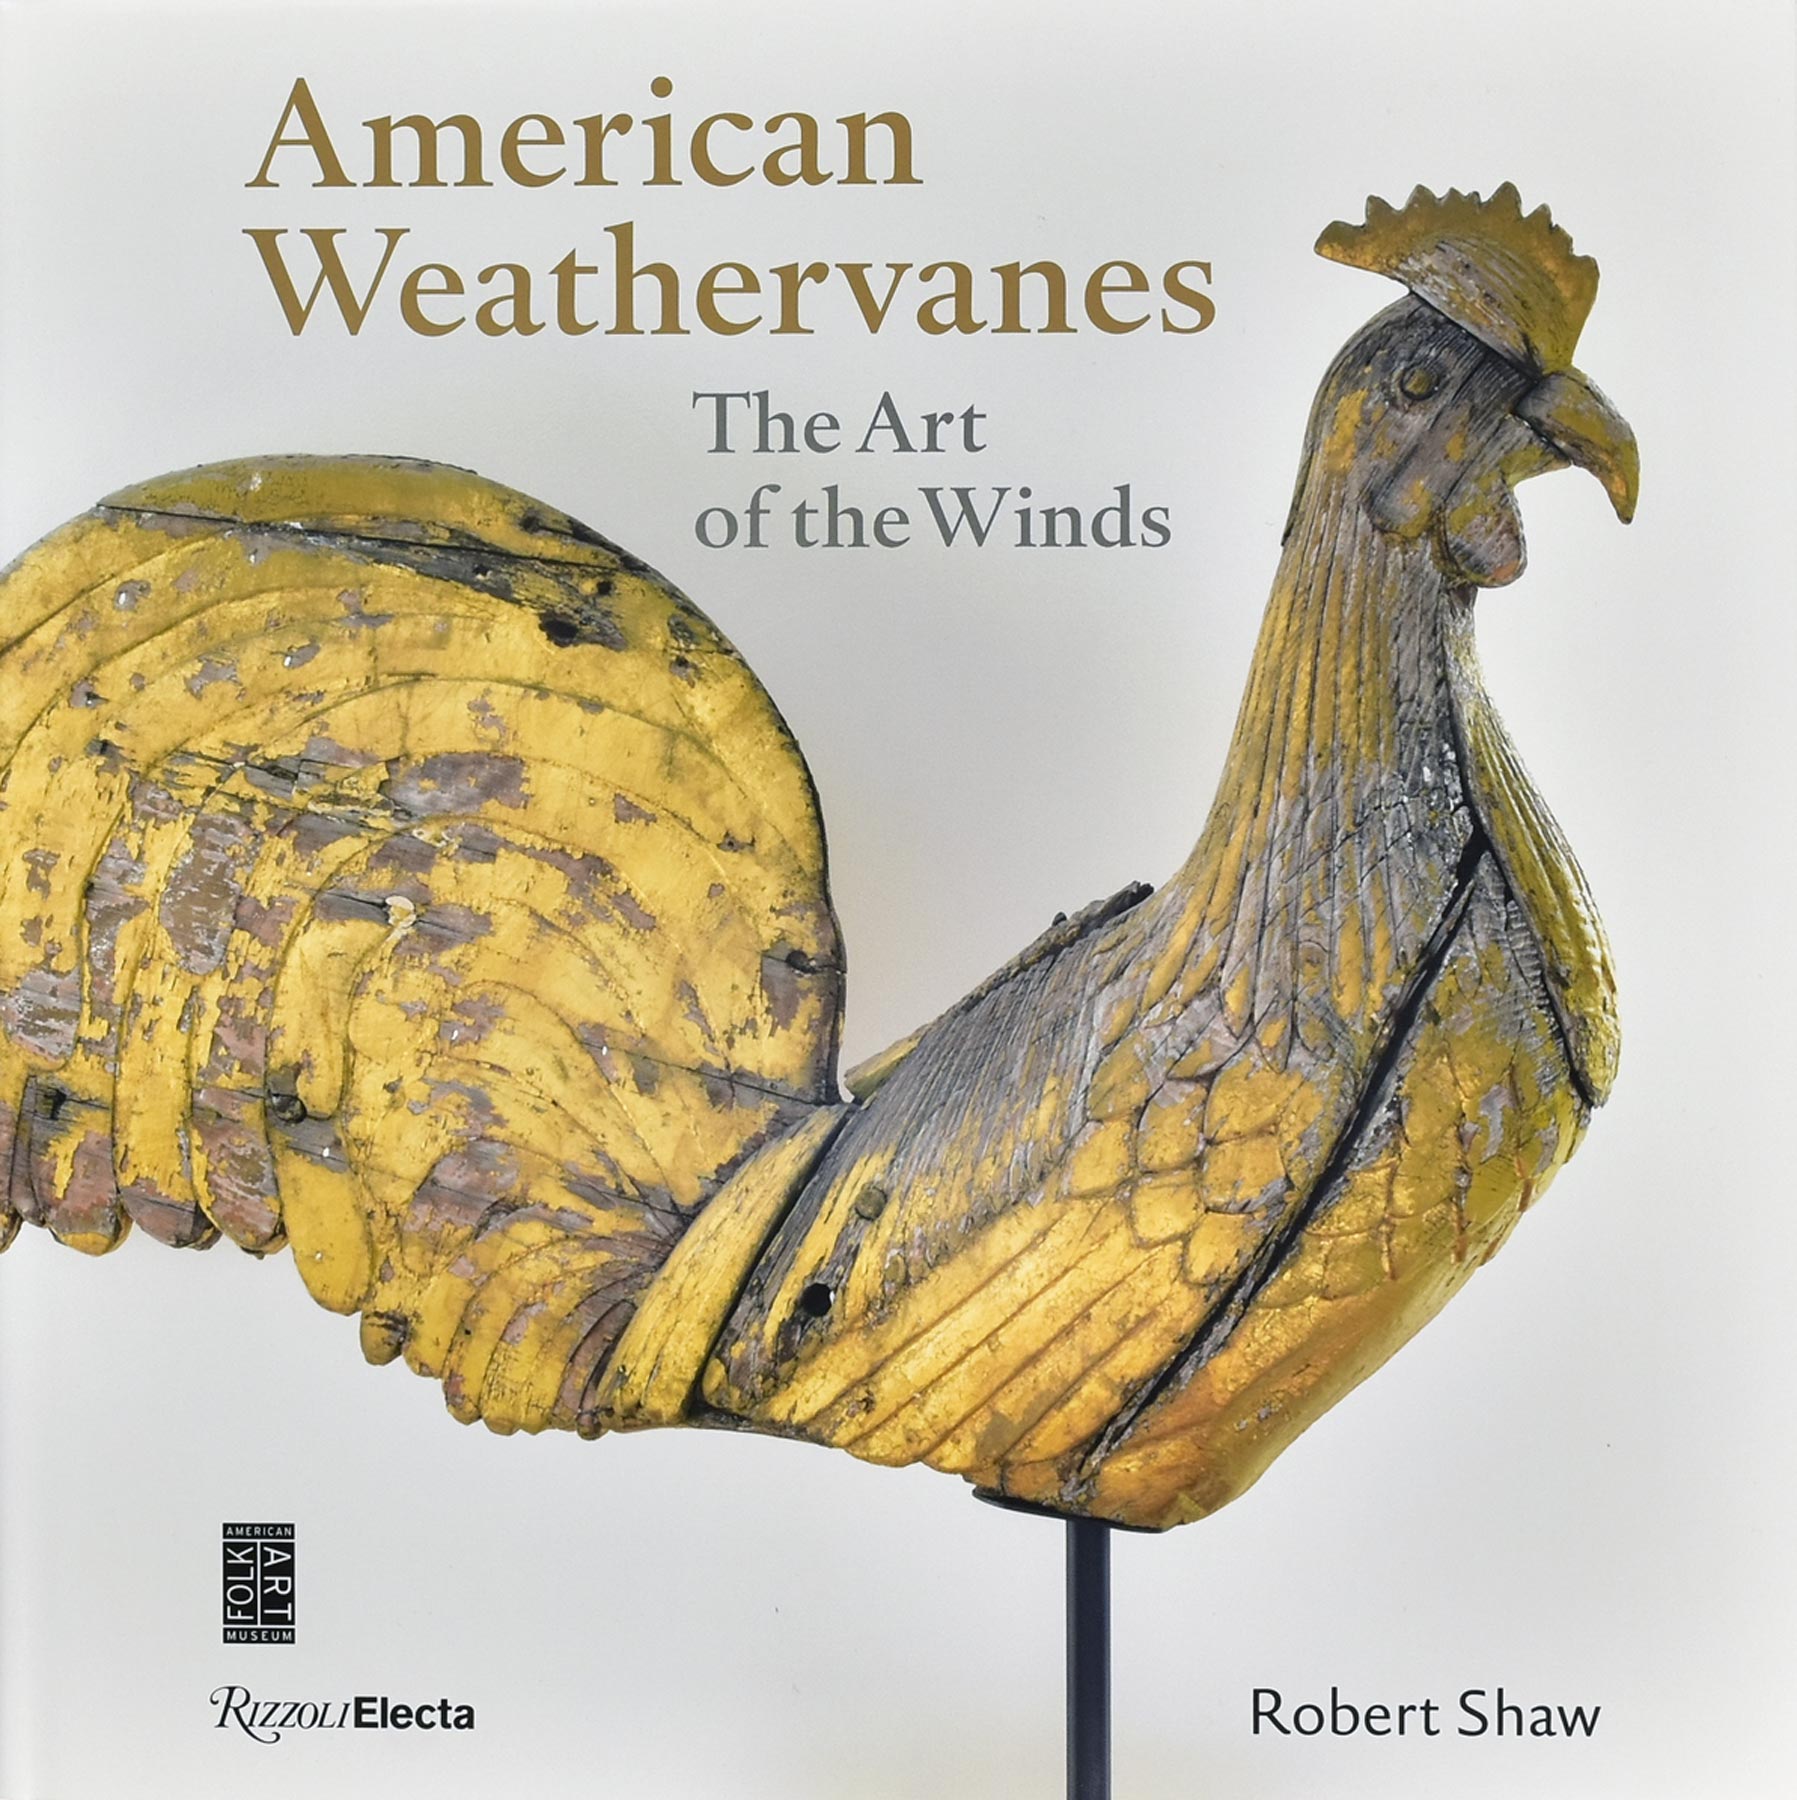 American Weathervanes: The Art of the Winds by Robert Shaw.